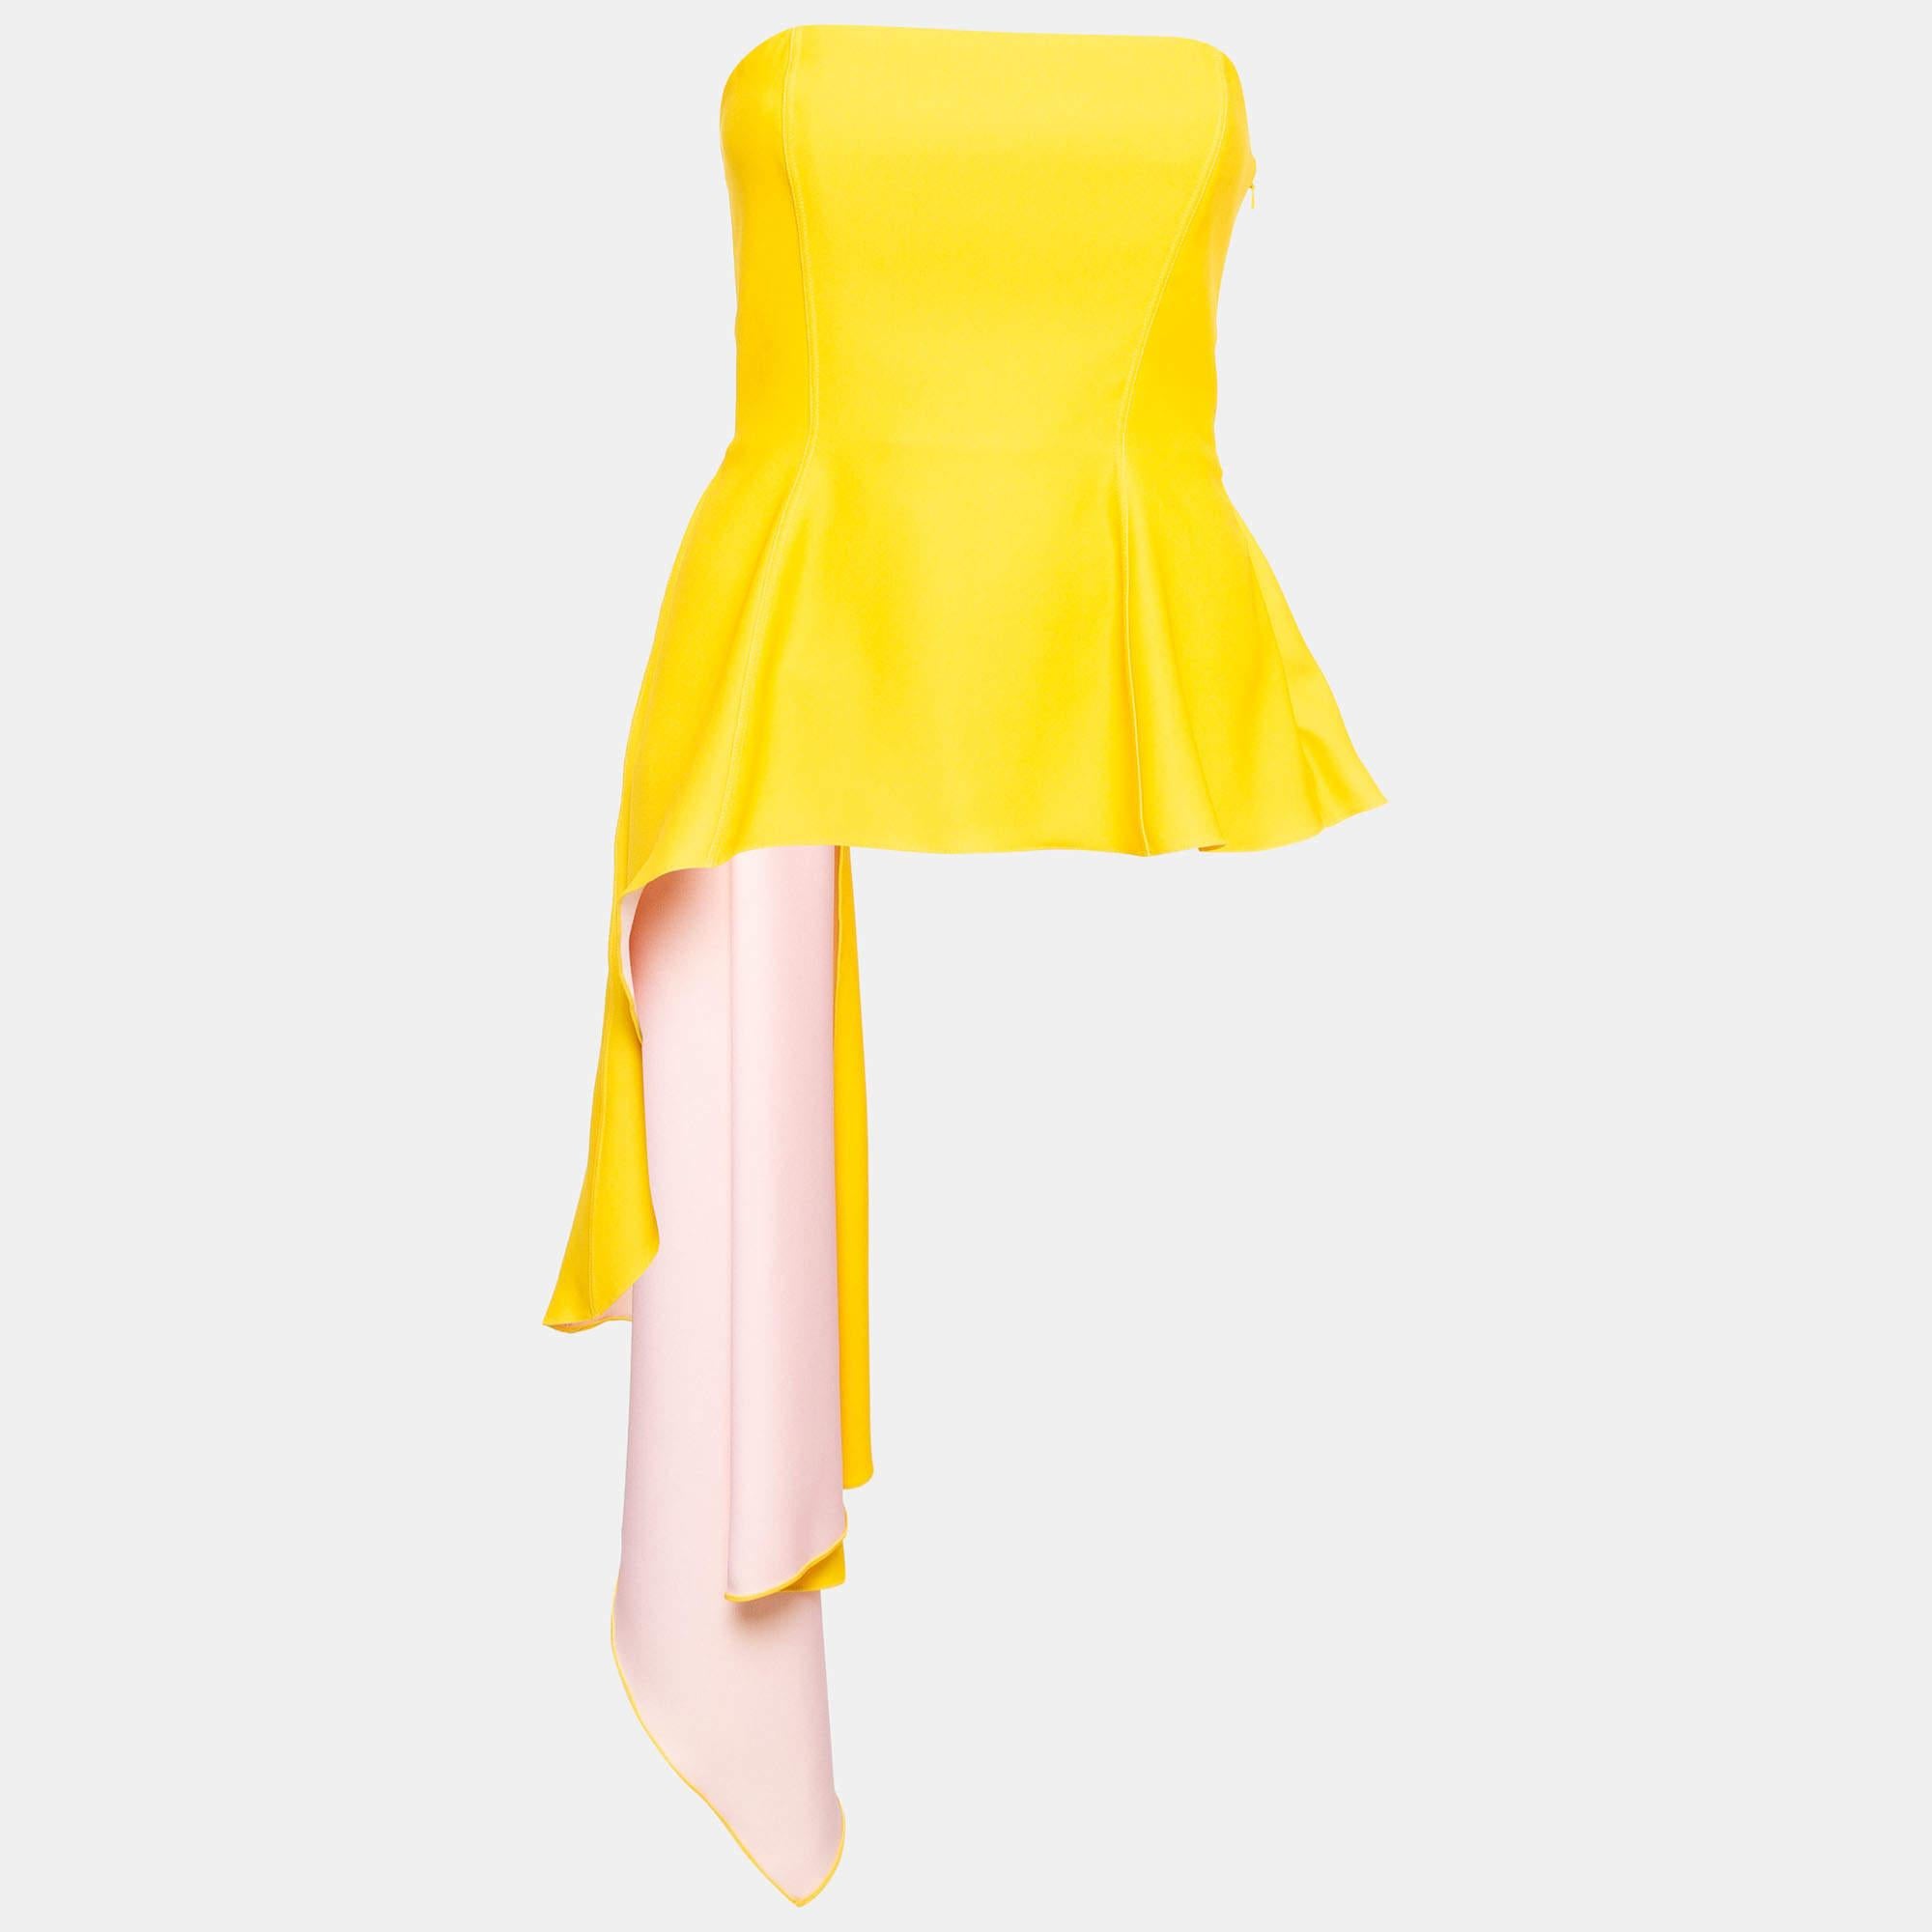 Introducing the Dior top, a vibrant marvel of fashion. Crafted with meticulous attention to detail, it exudes an effortless charm. Its strapless design and asymmetric silhouette offer a modern twist, while the corset element accentuates curves with